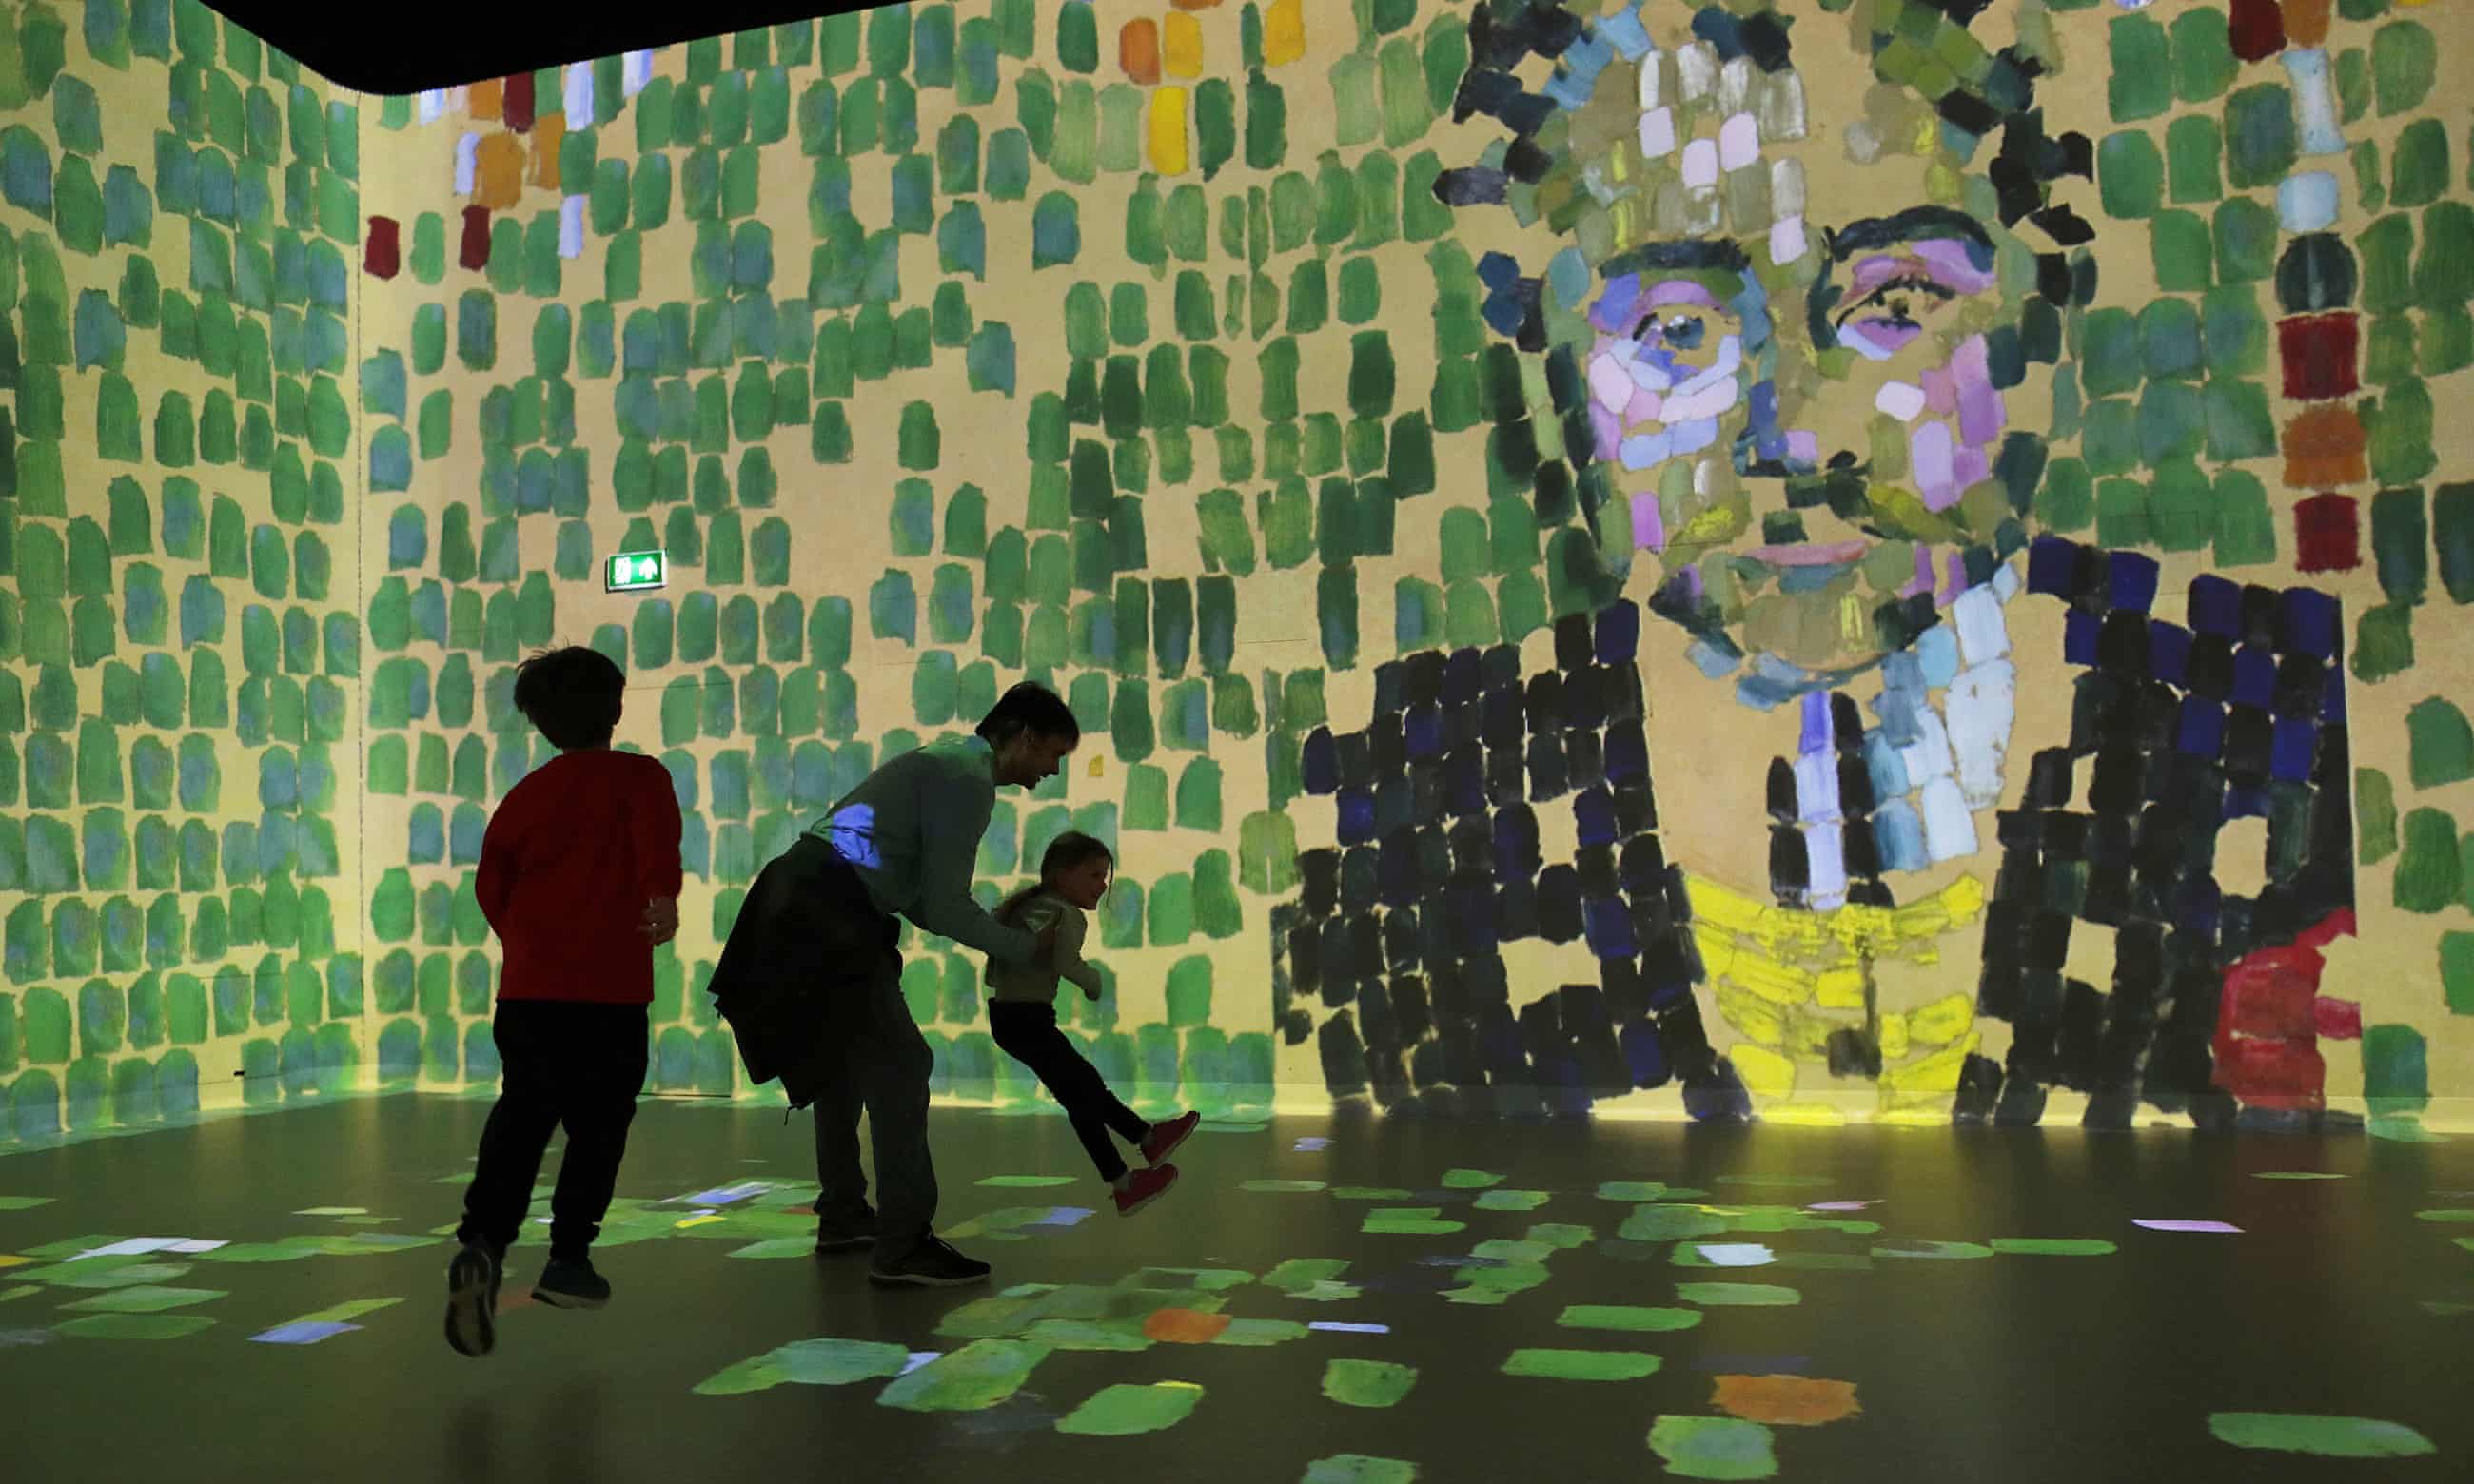 Ready to plunge in? The rise and rise of immersive art